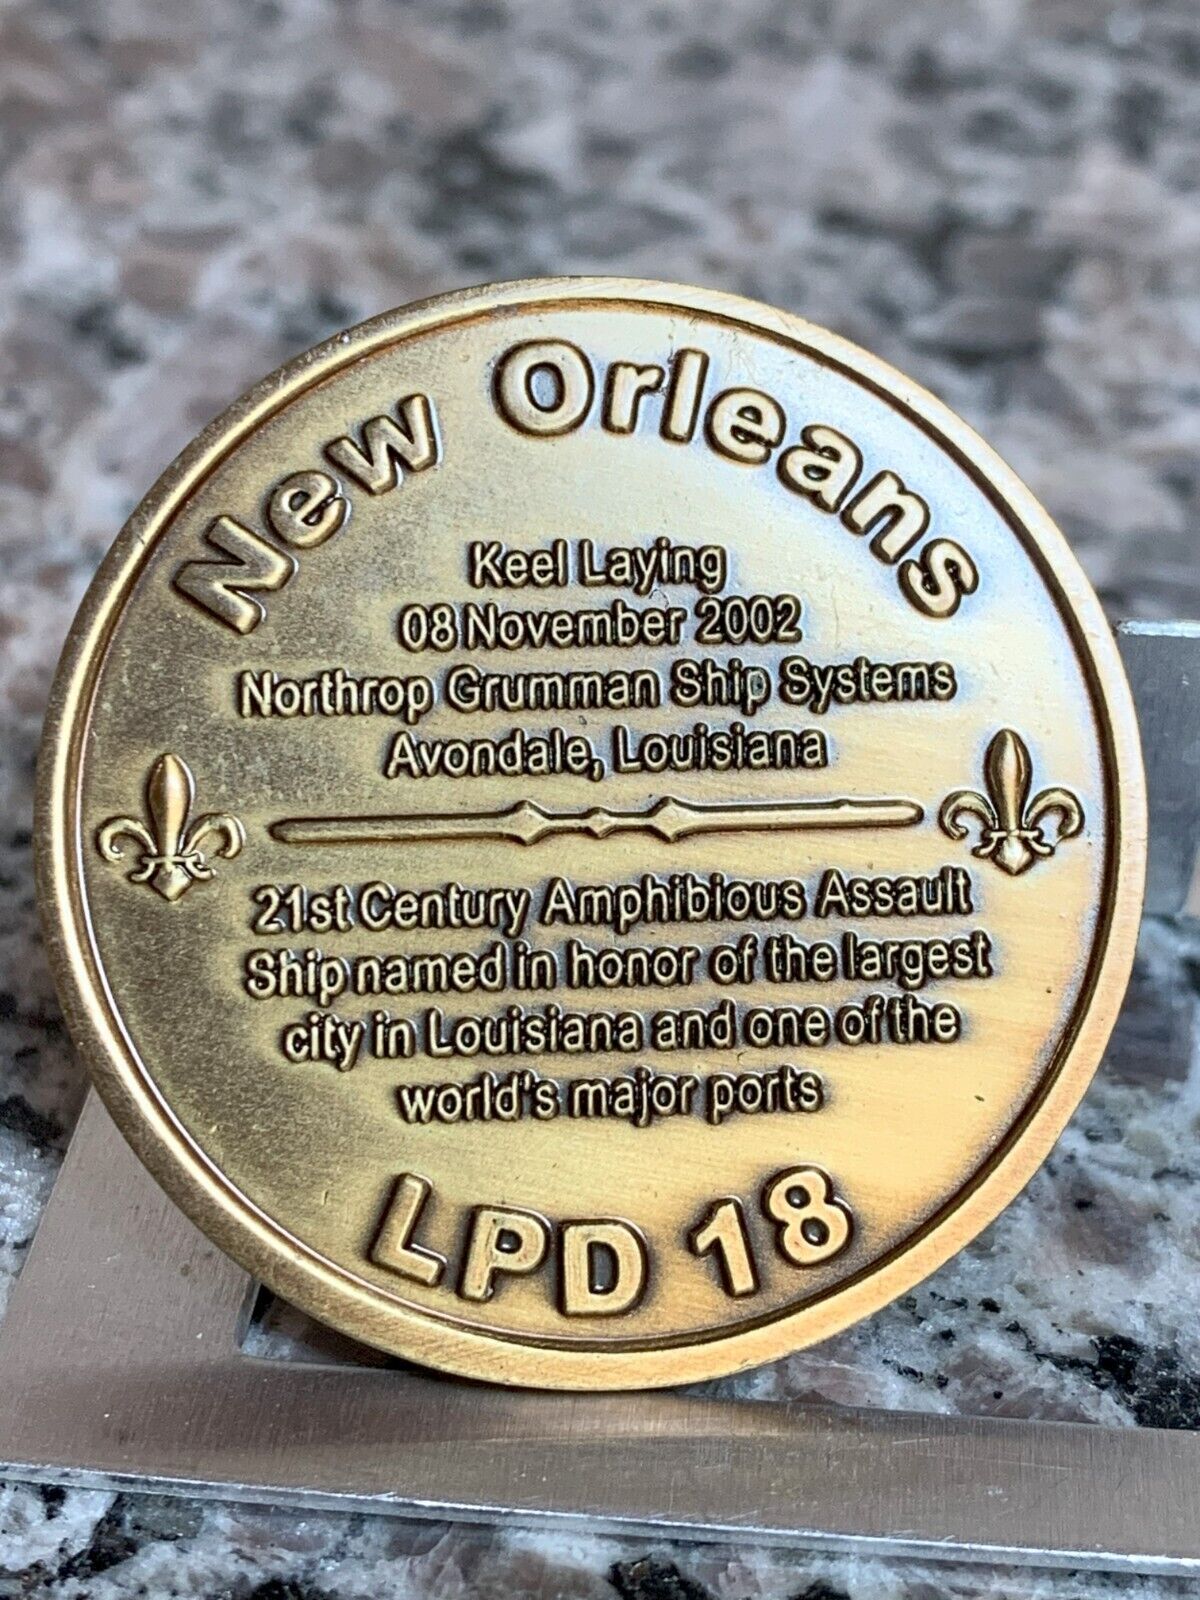 USS New Orleans LPD 18 Keel Laying Nov 8, 2002 medal coin Avondale Louisiana